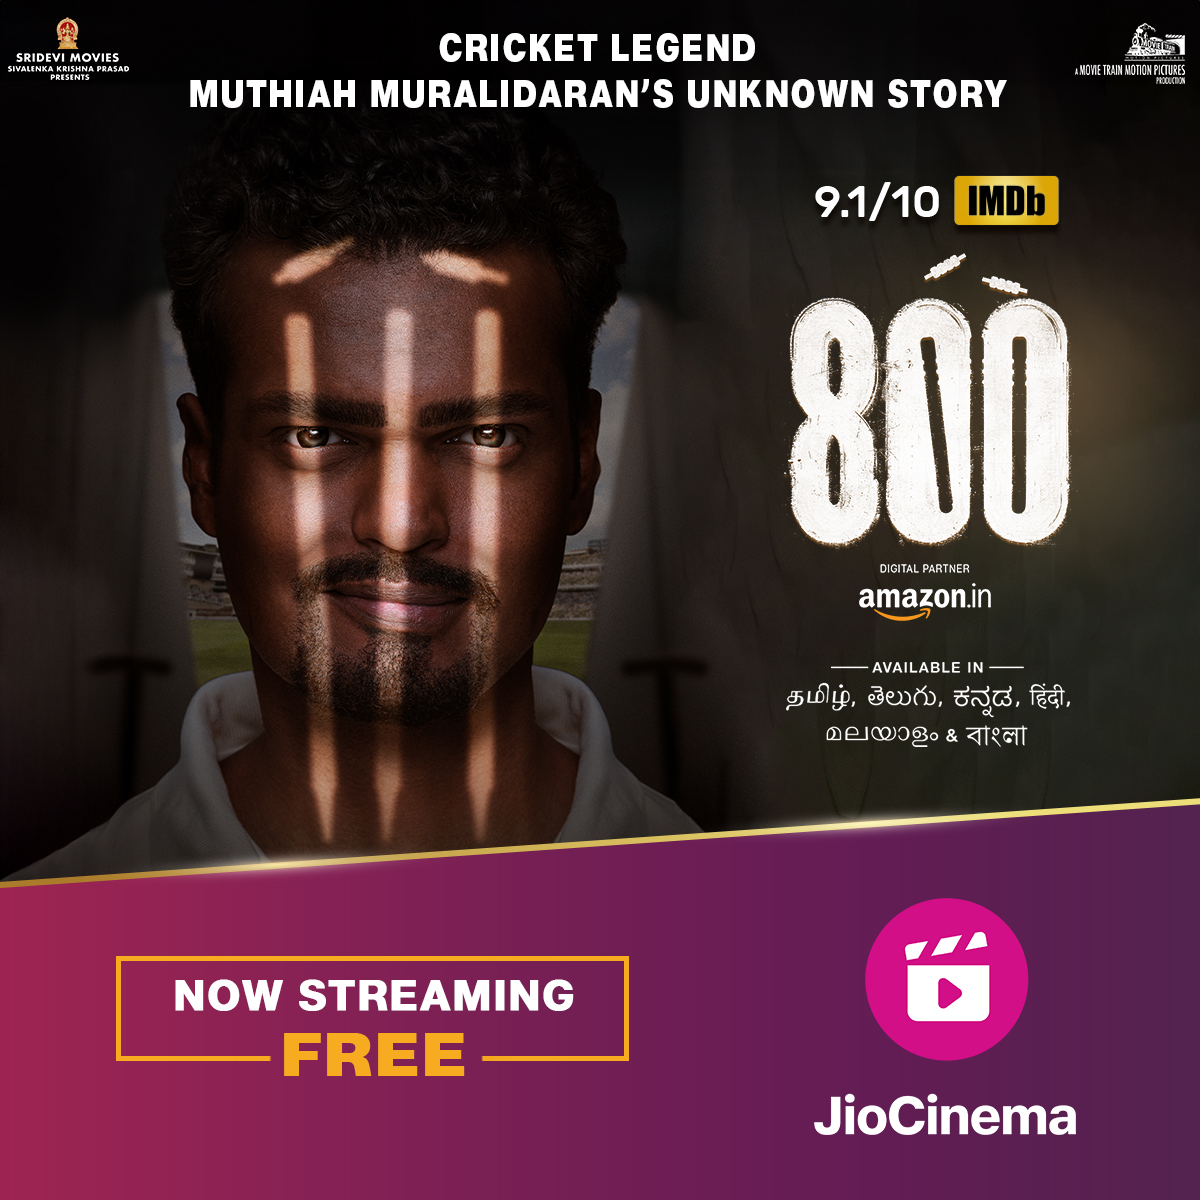 From a humble debut to a huge dynasty. 🏏 Catch the mind-blowing journey of Muthiah Muralidaran, who pushed the boundaries of destiny itself! Watch #800TheMovieOnJioCinema now streaming free. #800TheMovie #JioCinema @Murali_800 #MadhurMittal @Mahima_Nambiar @MovieTrainMP